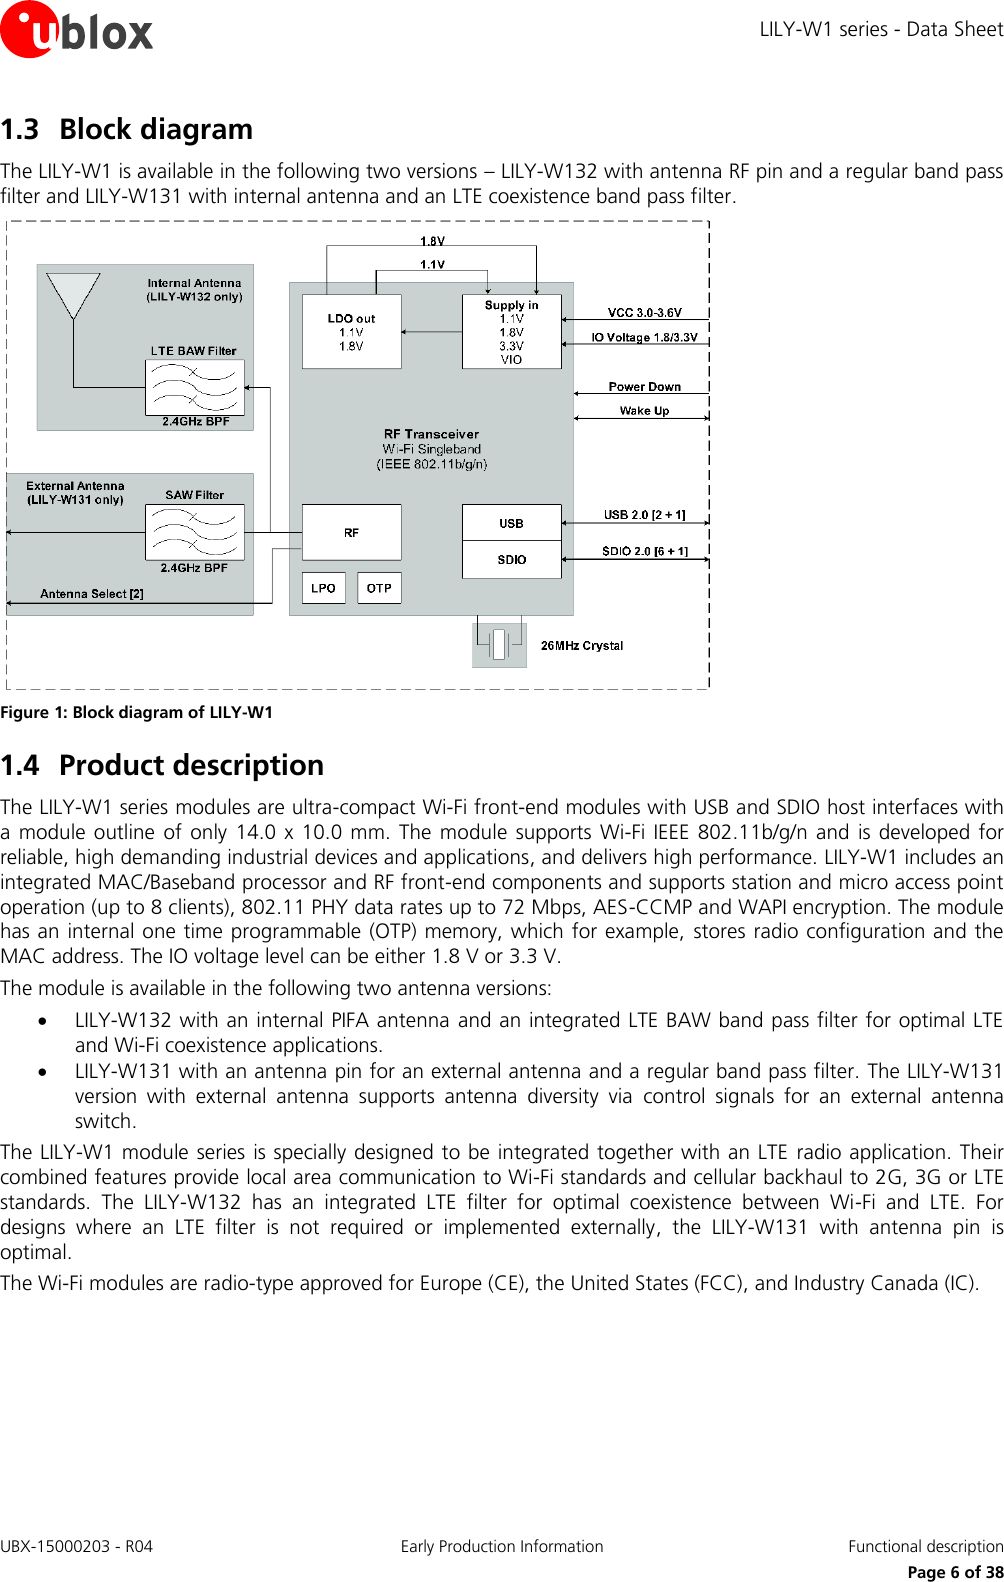 LILY-W1 series - Data Sheet UBX-15000203 - R04 Early Production Information  Functional description     Page 6 of 38 1.3 Block diagram The LILY-W1 is available in the following two versions – LILY-W132 with antenna RF pin and a regular band pass filter and LILY-W131 with internal antenna and an LTE coexistence band pass filter.  Figure 1: Block diagram of LILY-W1 1.4 Product description The LILY-W1 series modules are ultra-compact Wi-Fi front-end modules with USB and SDIO host interfaces with a module  outline  of  only  14.0 x  10.0  mm. The  module supports  Wi-Fi  IEEE  802.11b/g/n  and  is  developed  for reliable, high demanding industrial devices and applications, and delivers high performance. LILY-W1 includes an integrated MAC/Baseband processor and RF front-end components and supports station and micro access point operation (up to 8 clients), 802.11 PHY data rates up to 72 Mbps, AES-CCMP and WAPI encryption. The module has an internal one time programmable  (OTP) memory, which for example,  stores radio configuration and the MAC address. The IO voltage level can be either 1.8 V or 3.3 V. The module is available in the following two antenna versions:   LILY-W132 with an internal PIFA antenna and an integrated LTE BAW band pass filter for optimal LTE and Wi-Fi coexistence applications.  LILY-W131 with an antenna pin for an external antenna and a regular band pass filter. The LILY-W131 version  with  external  antenna  supports  antenna  diversity  via  control  signals  for  an  external  antenna switch. The LILY-W1 module series is specially designed to be integrated together with an LTE radio application. Their combined features provide local area communication to Wi-Fi standards and cellular backhaul to 2G, 3G or LTE standards.  The  LILY-W132  has  an  integrated  LTE  filter  for  optimal  coexistence  between  Wi-Fi  and  LTE.  For designs  where  an  LTE  filter  is  not  required  or  implemented  externally,  the  LILY-W131  with  antenna  pin  is optimal. The Wi-Fi modules are radio-type approved for Europe (CE), the United States (FCC), and Industry Canada (IC).   